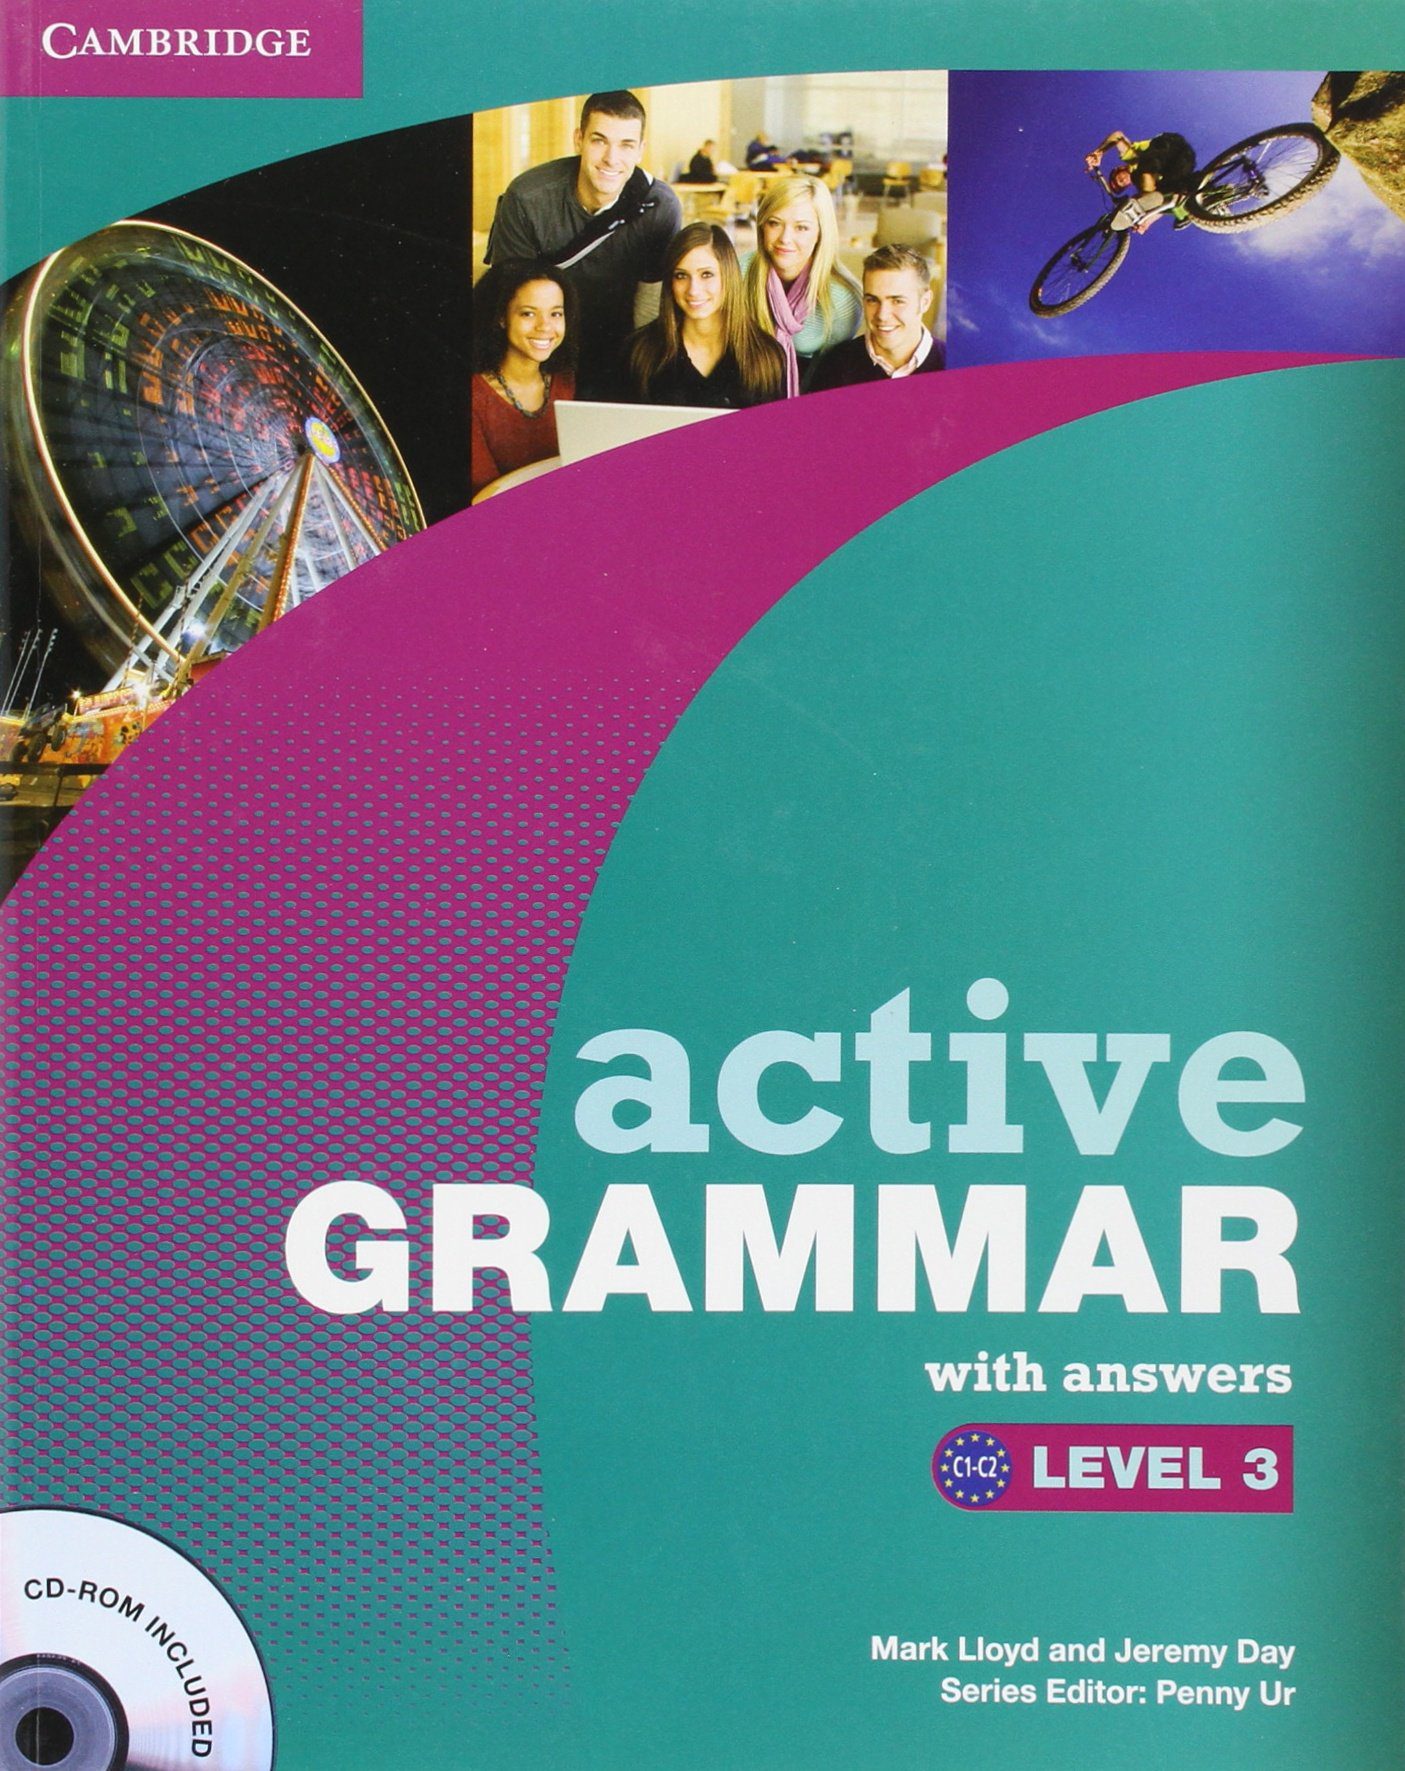 Rich Results on Google's SERP when searching for 'Active Grammar With Answers Book 3'